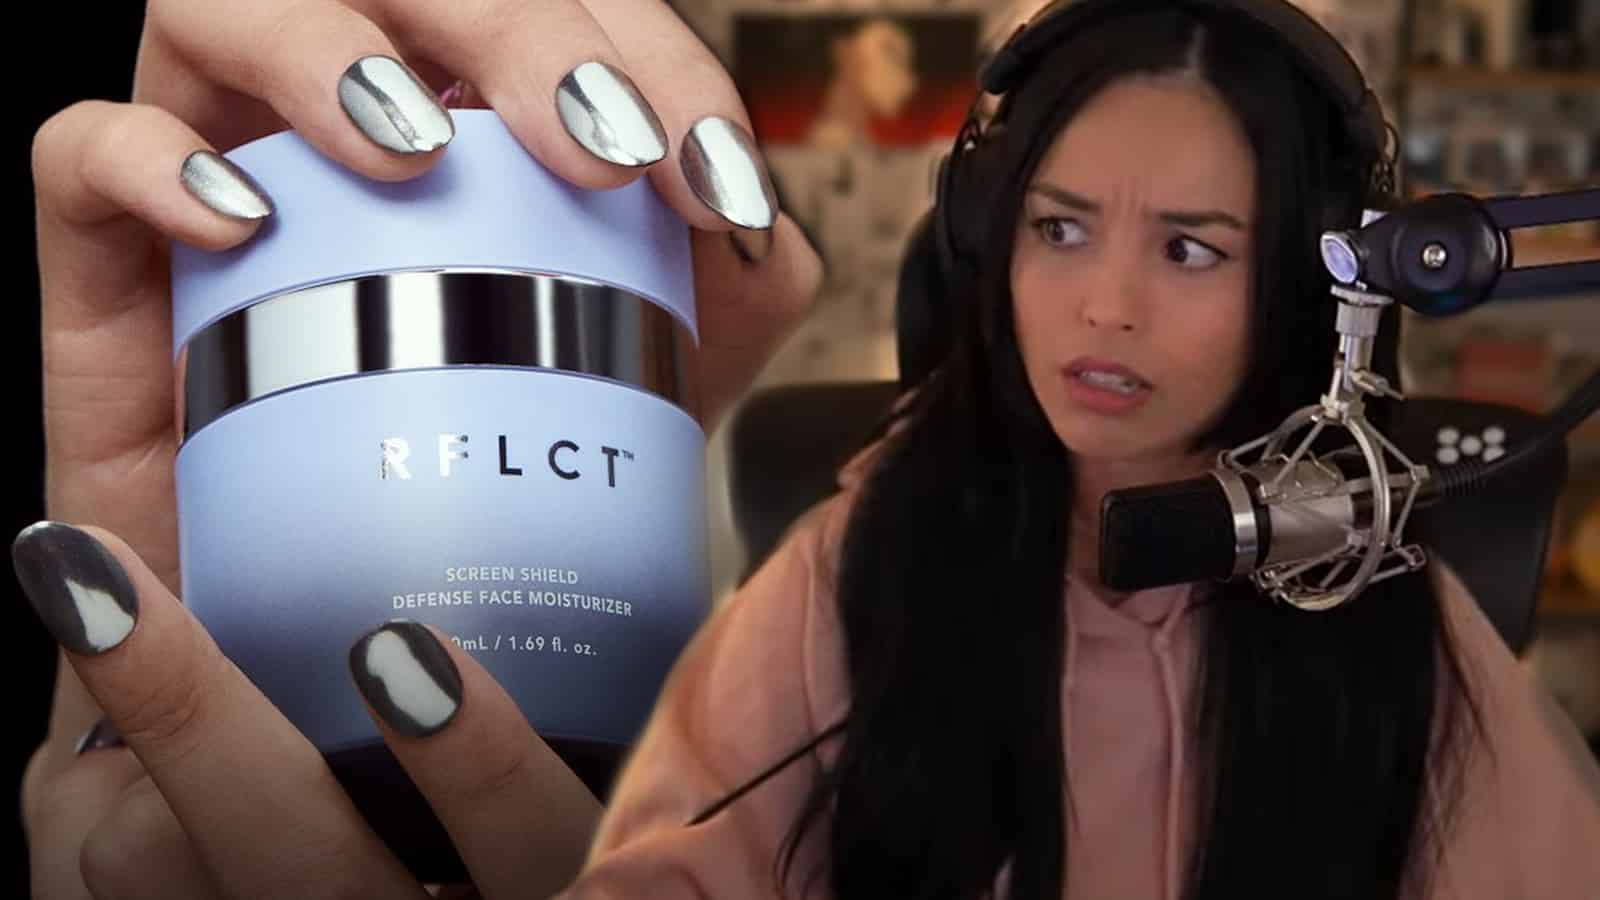 Valkyrae stares at RFLCT skincare product.